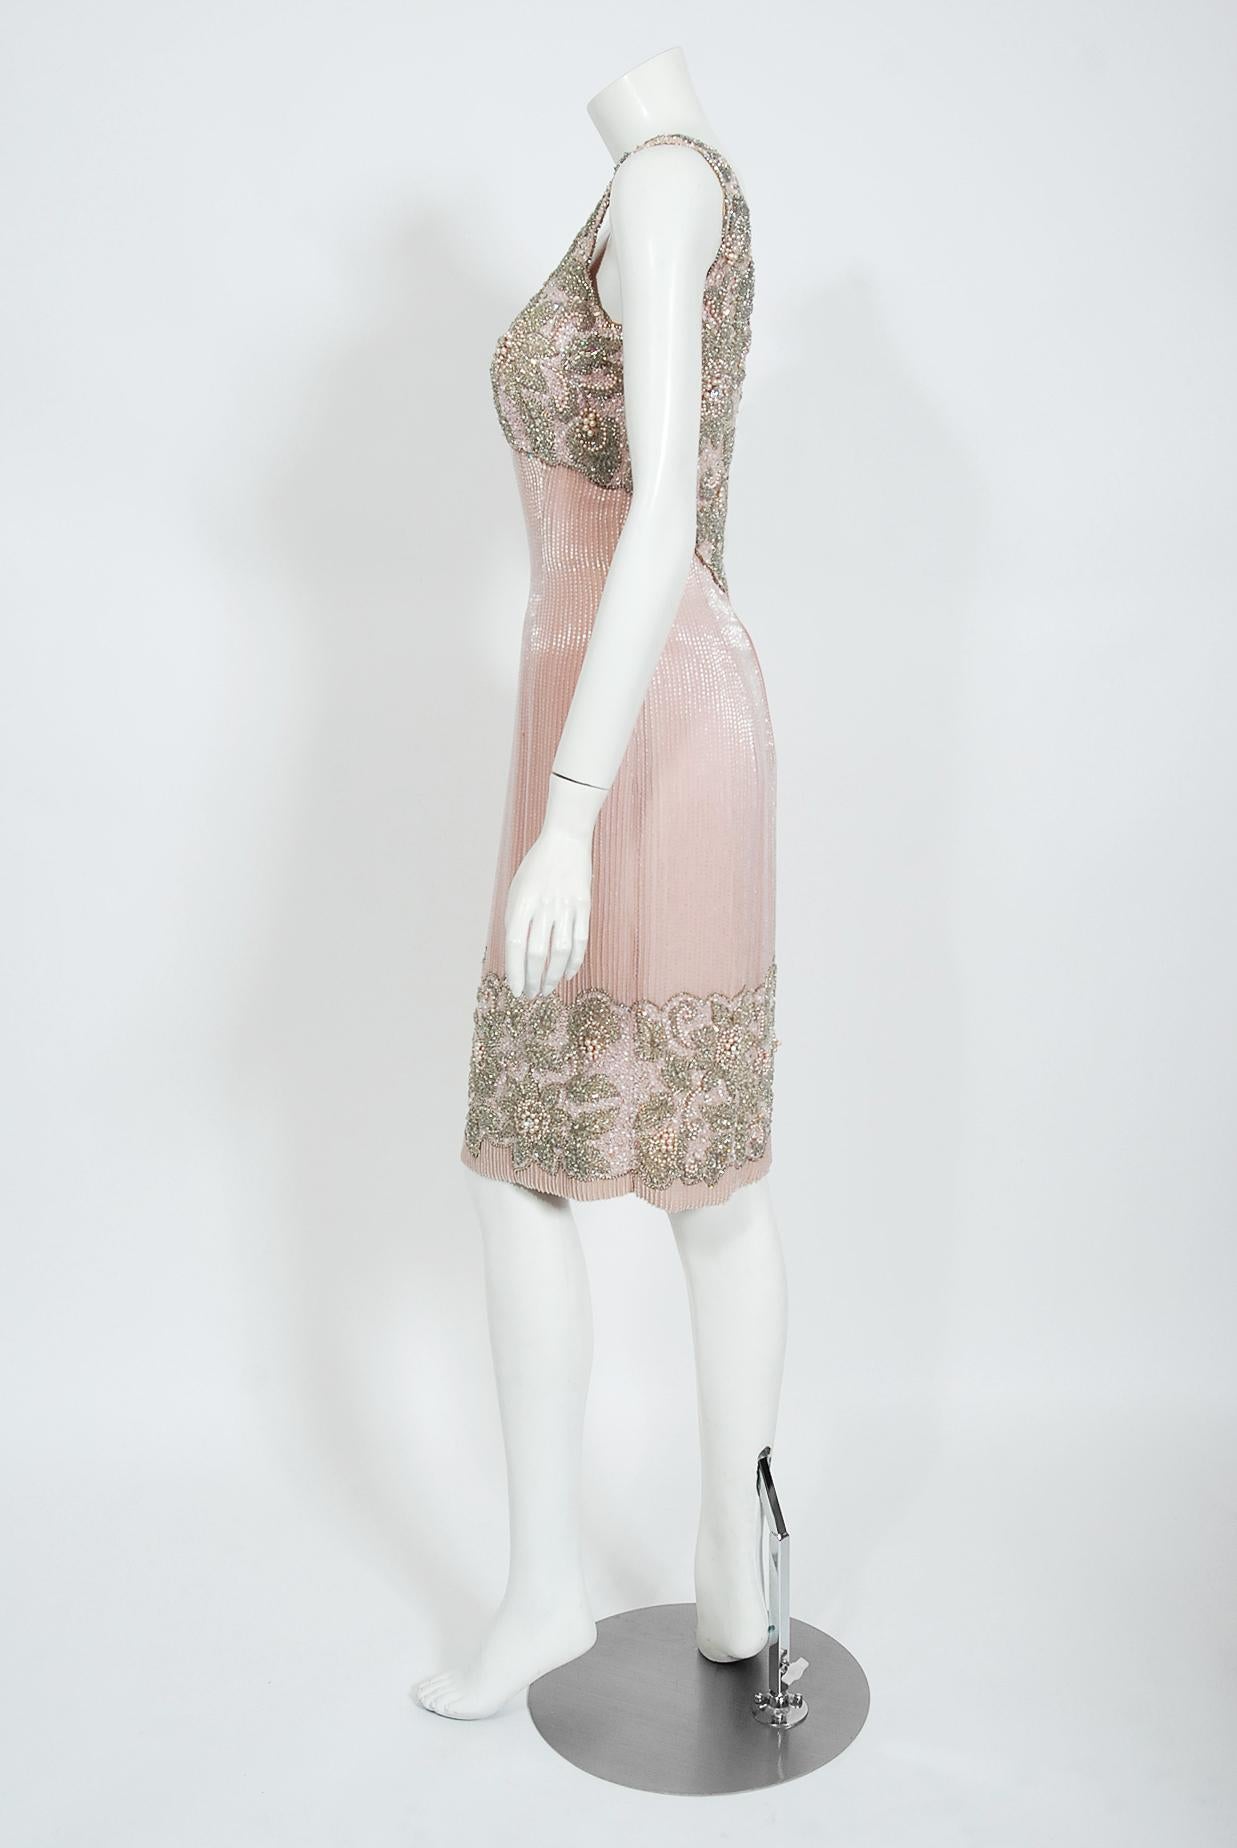 Women's Vintage 1960's Helen Rose Couture Fully-Beaded Blush Pink Silk Hourglass Dress For Sale